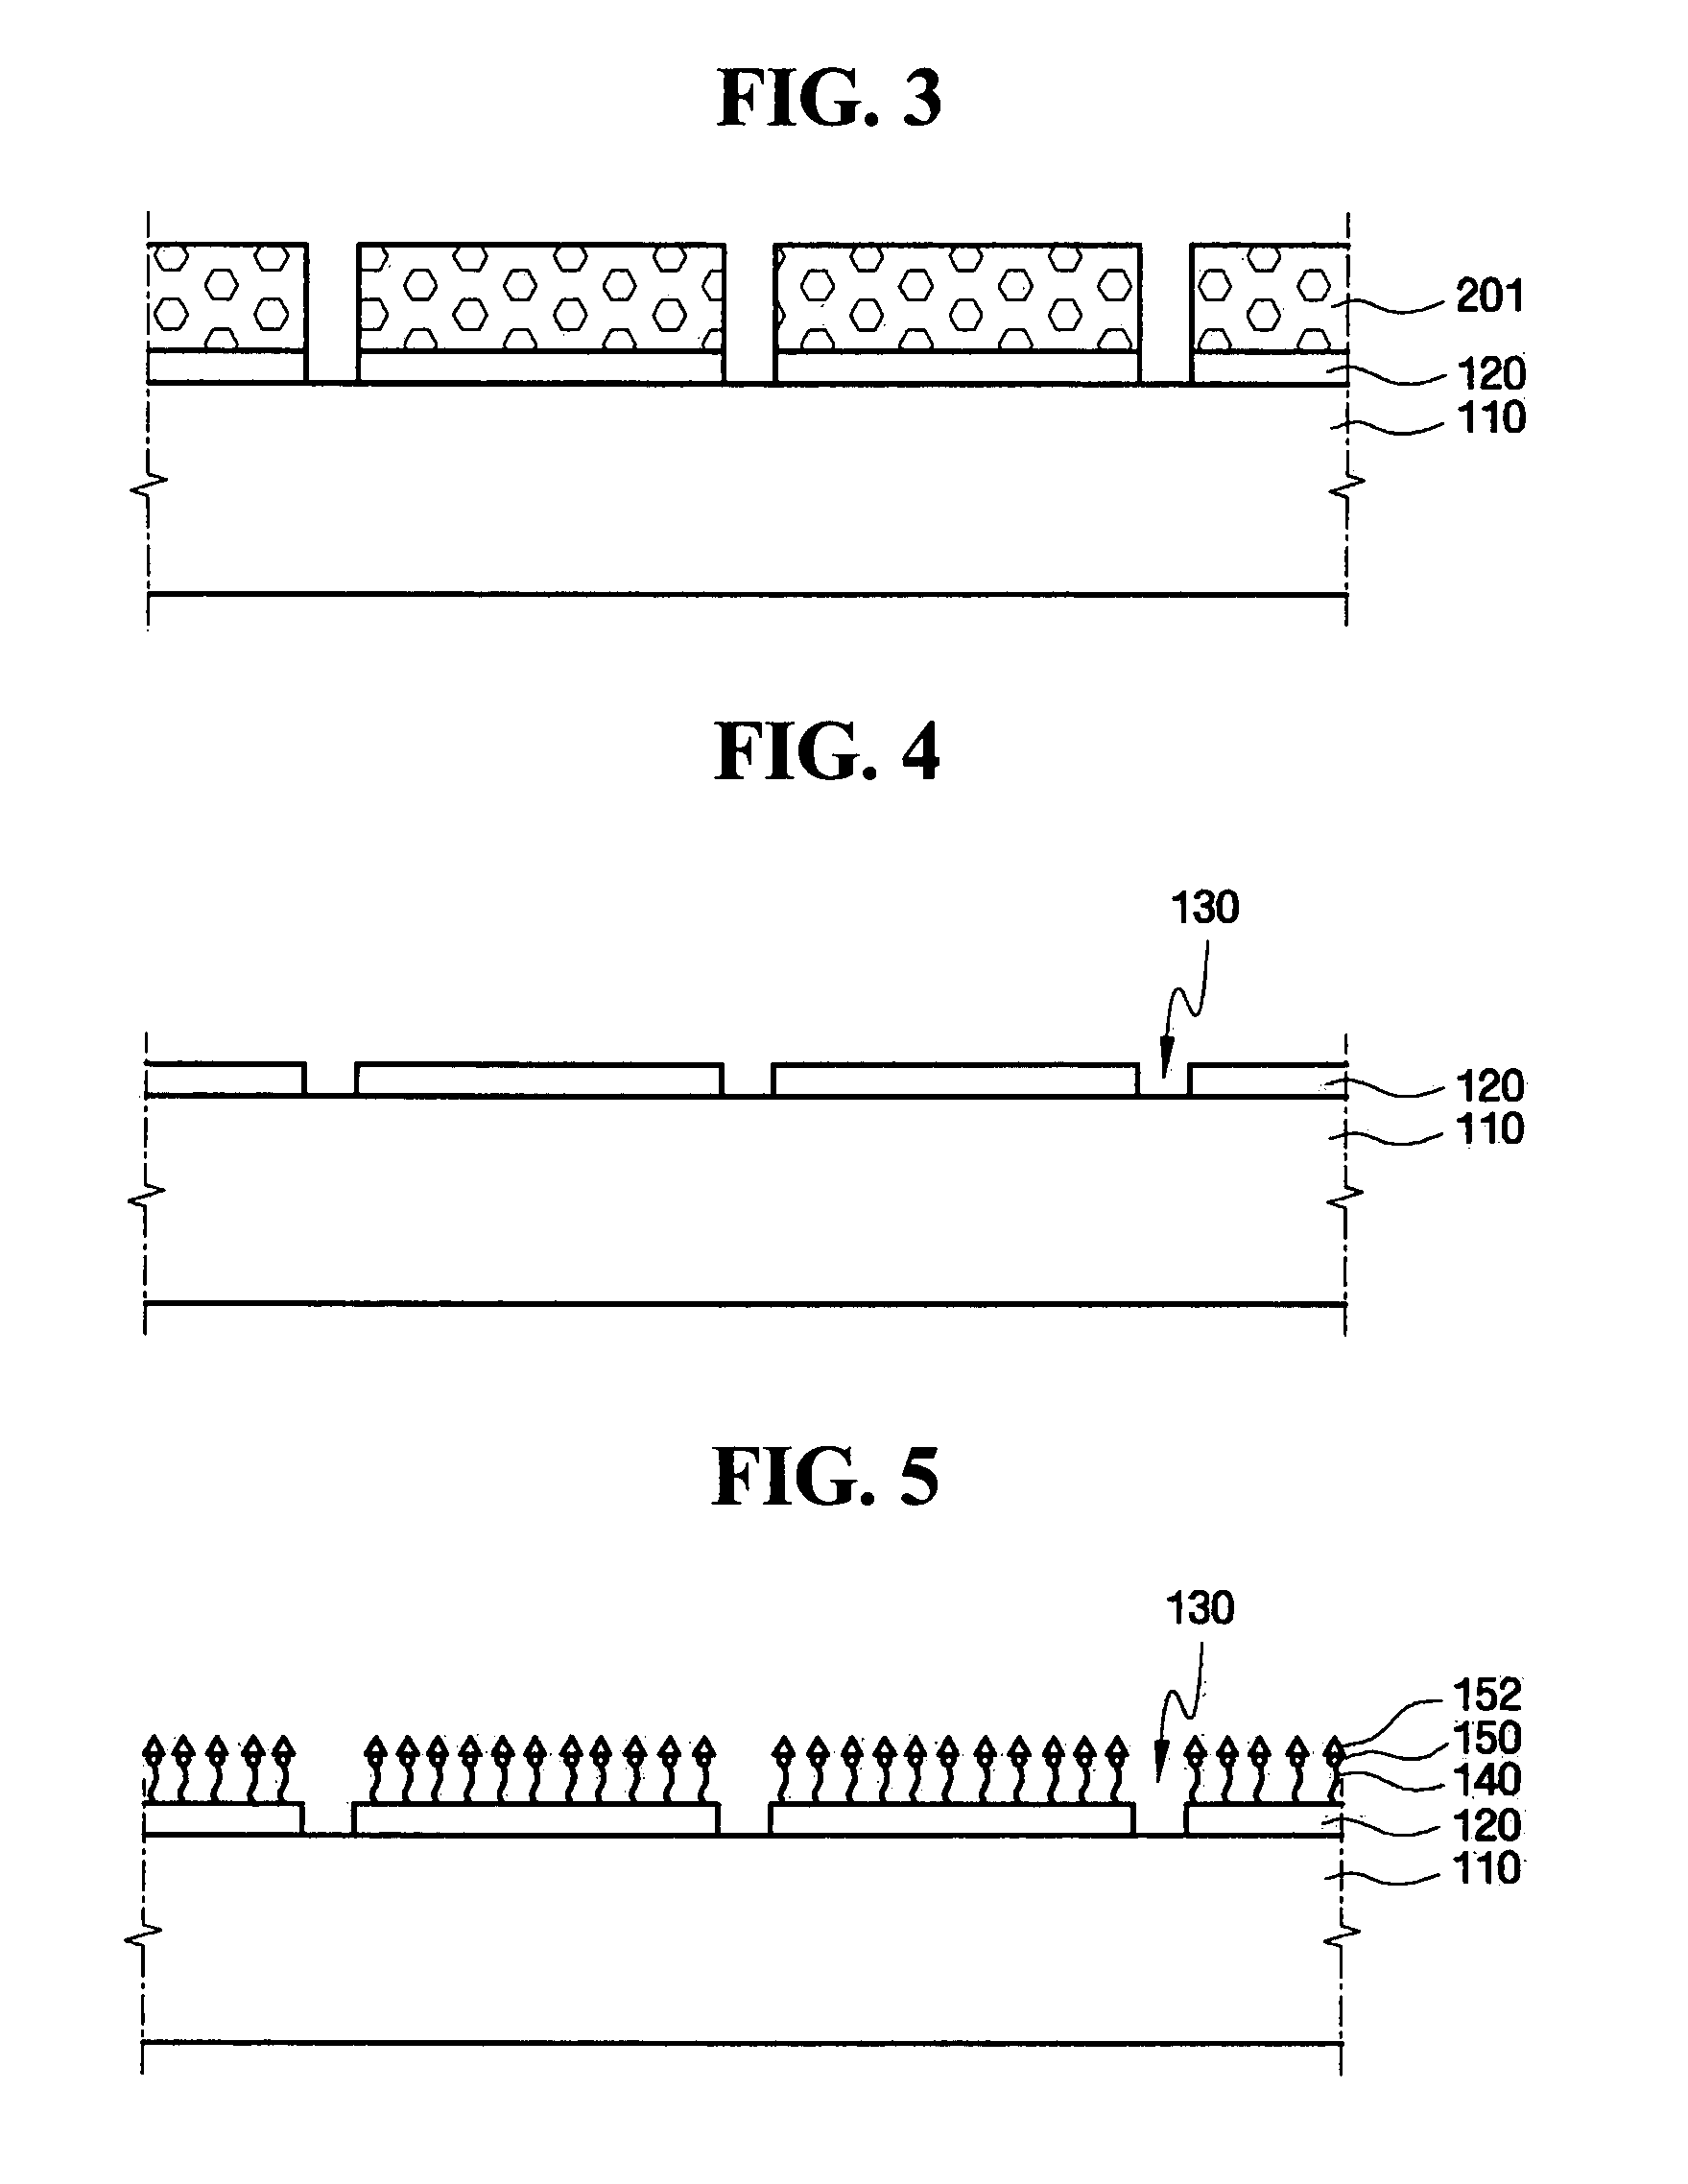 Method of manufacturing a microarray